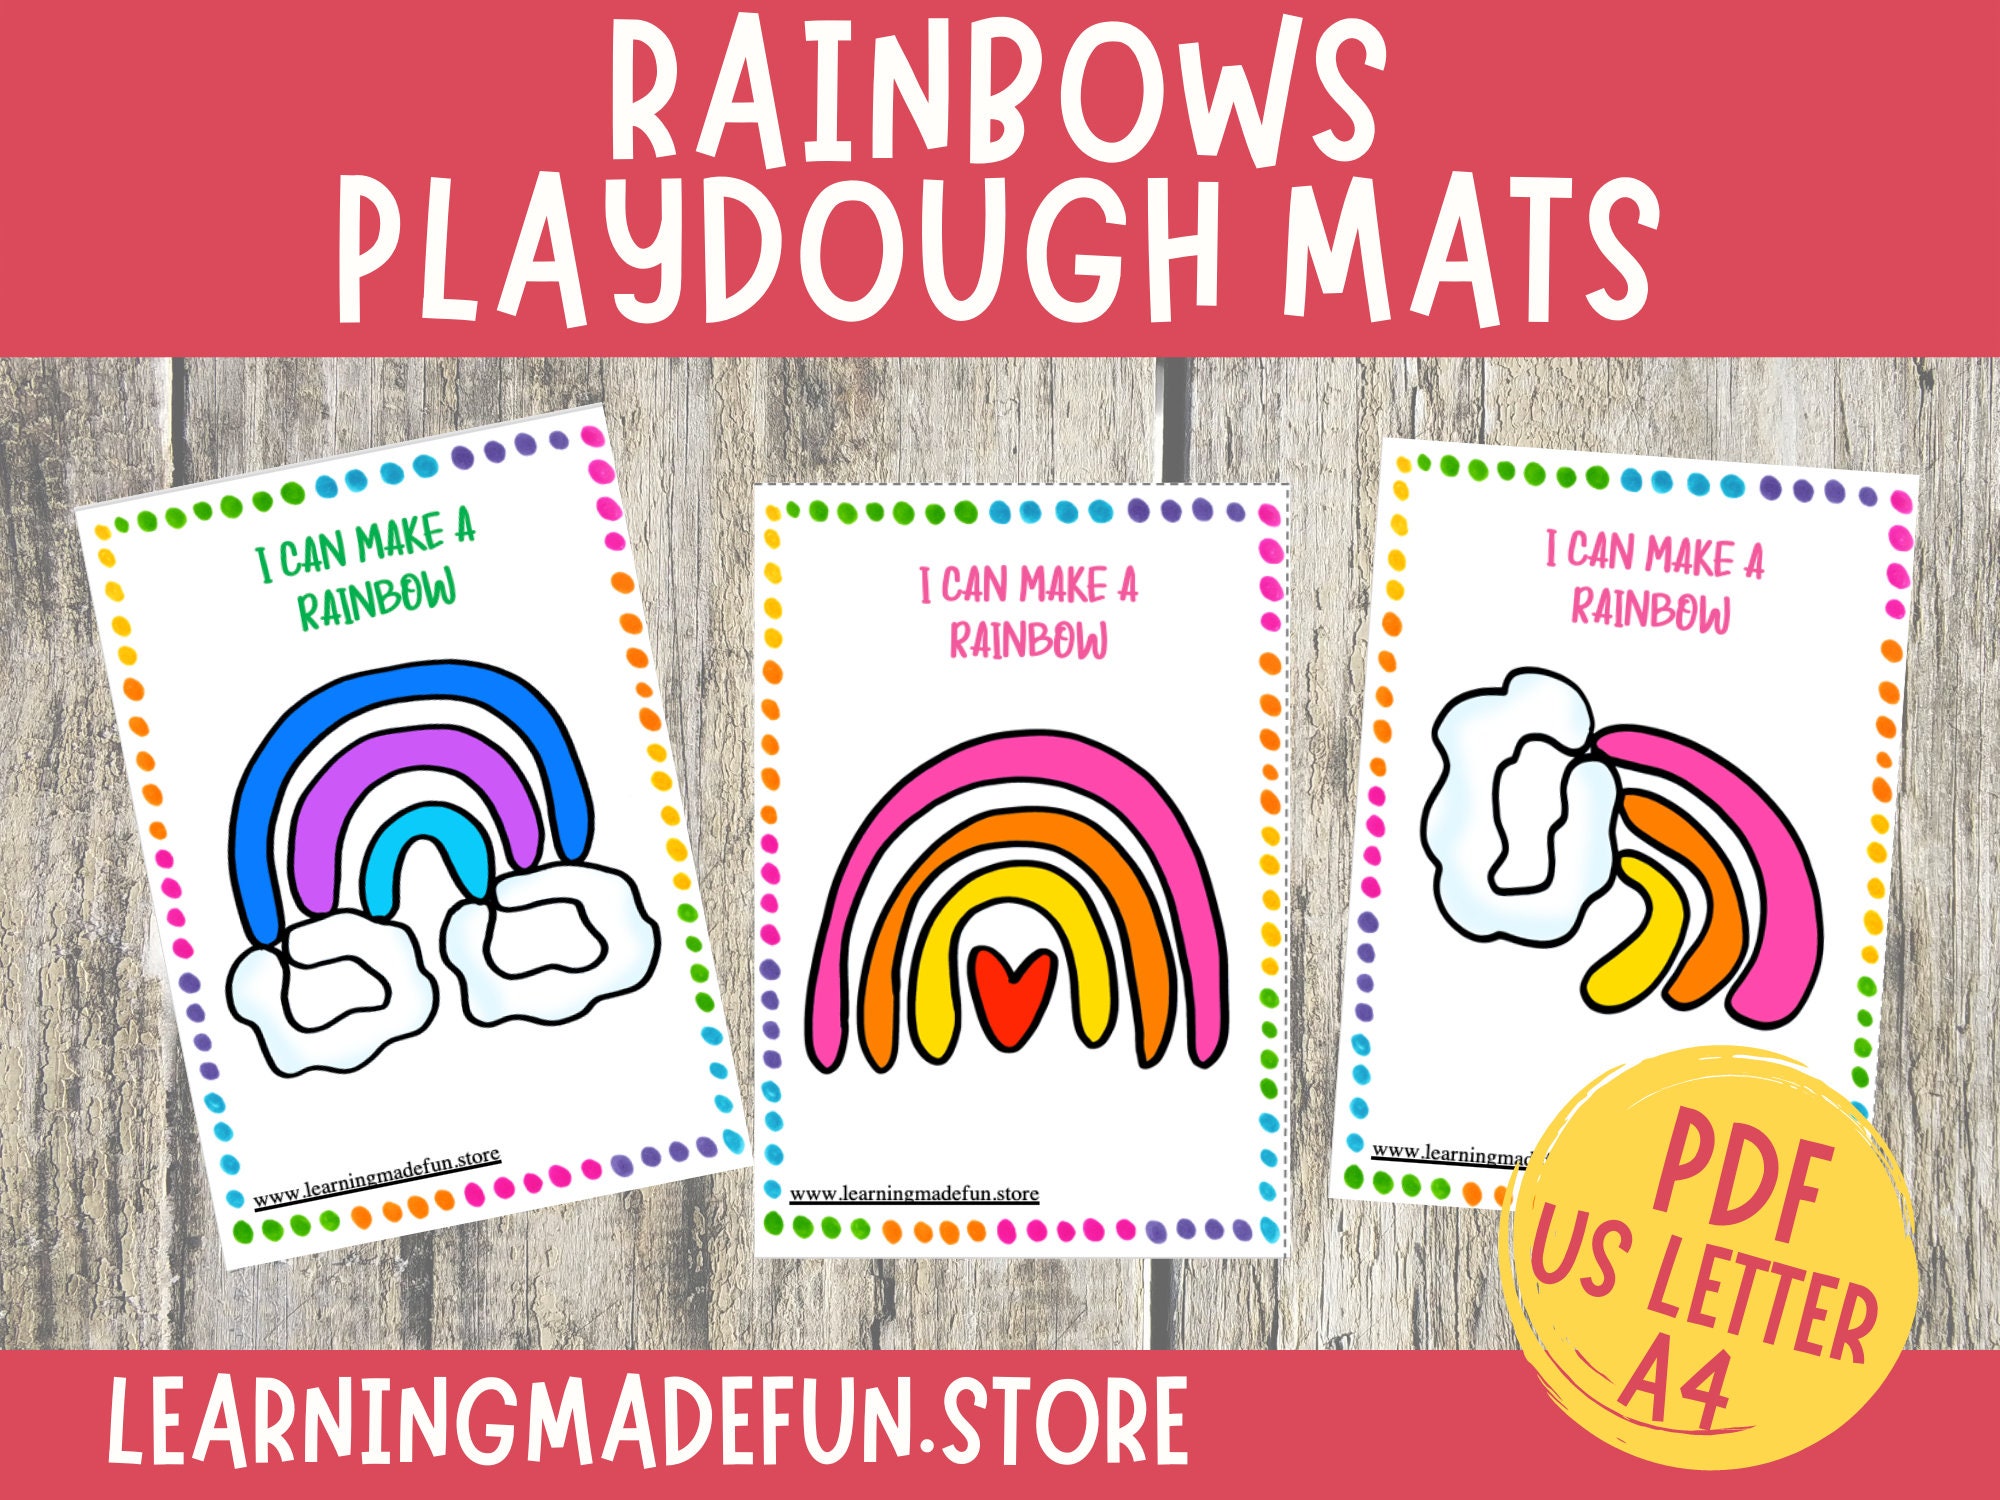 Fish bowl playdough mat (free printable) - Special Learning House